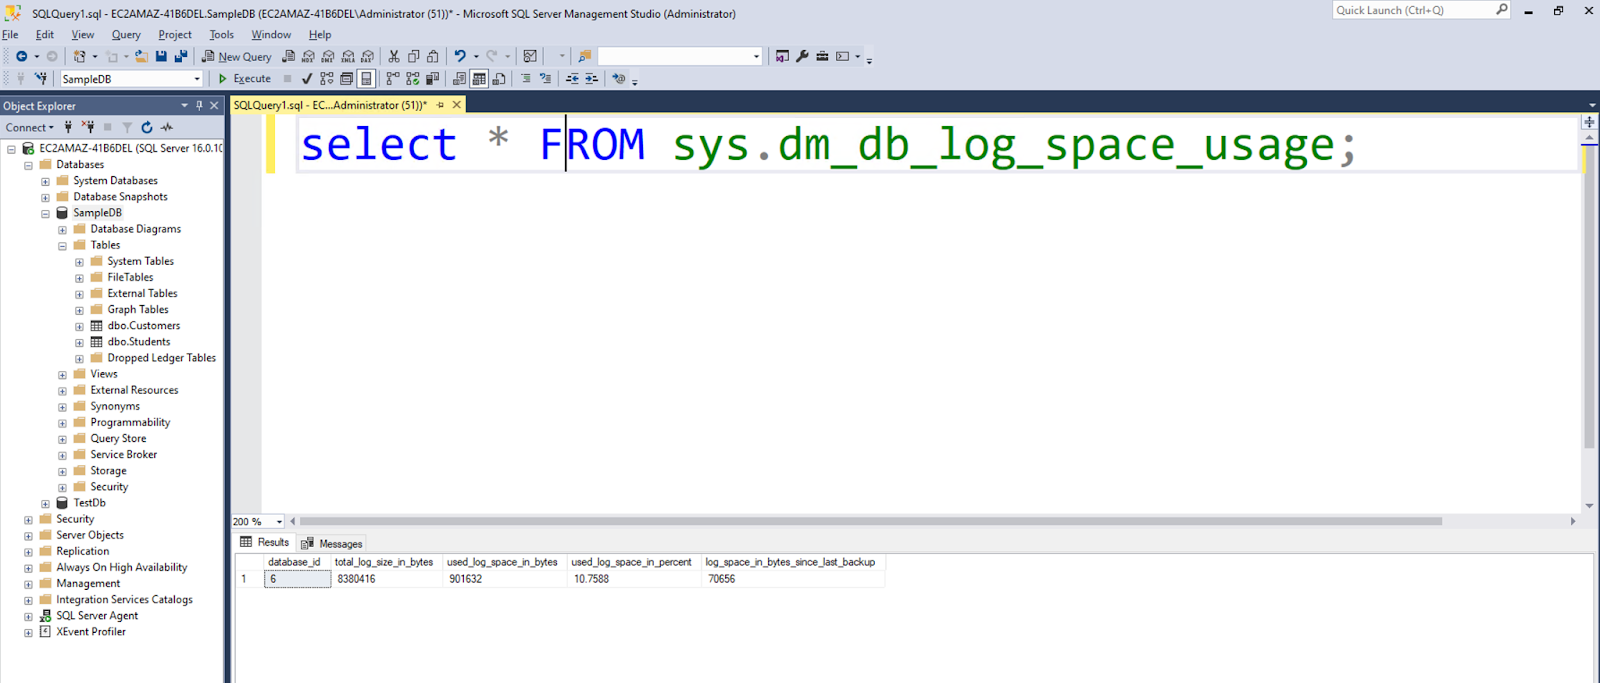 Query retrieving all rows from the dm_db_log_space_usage view